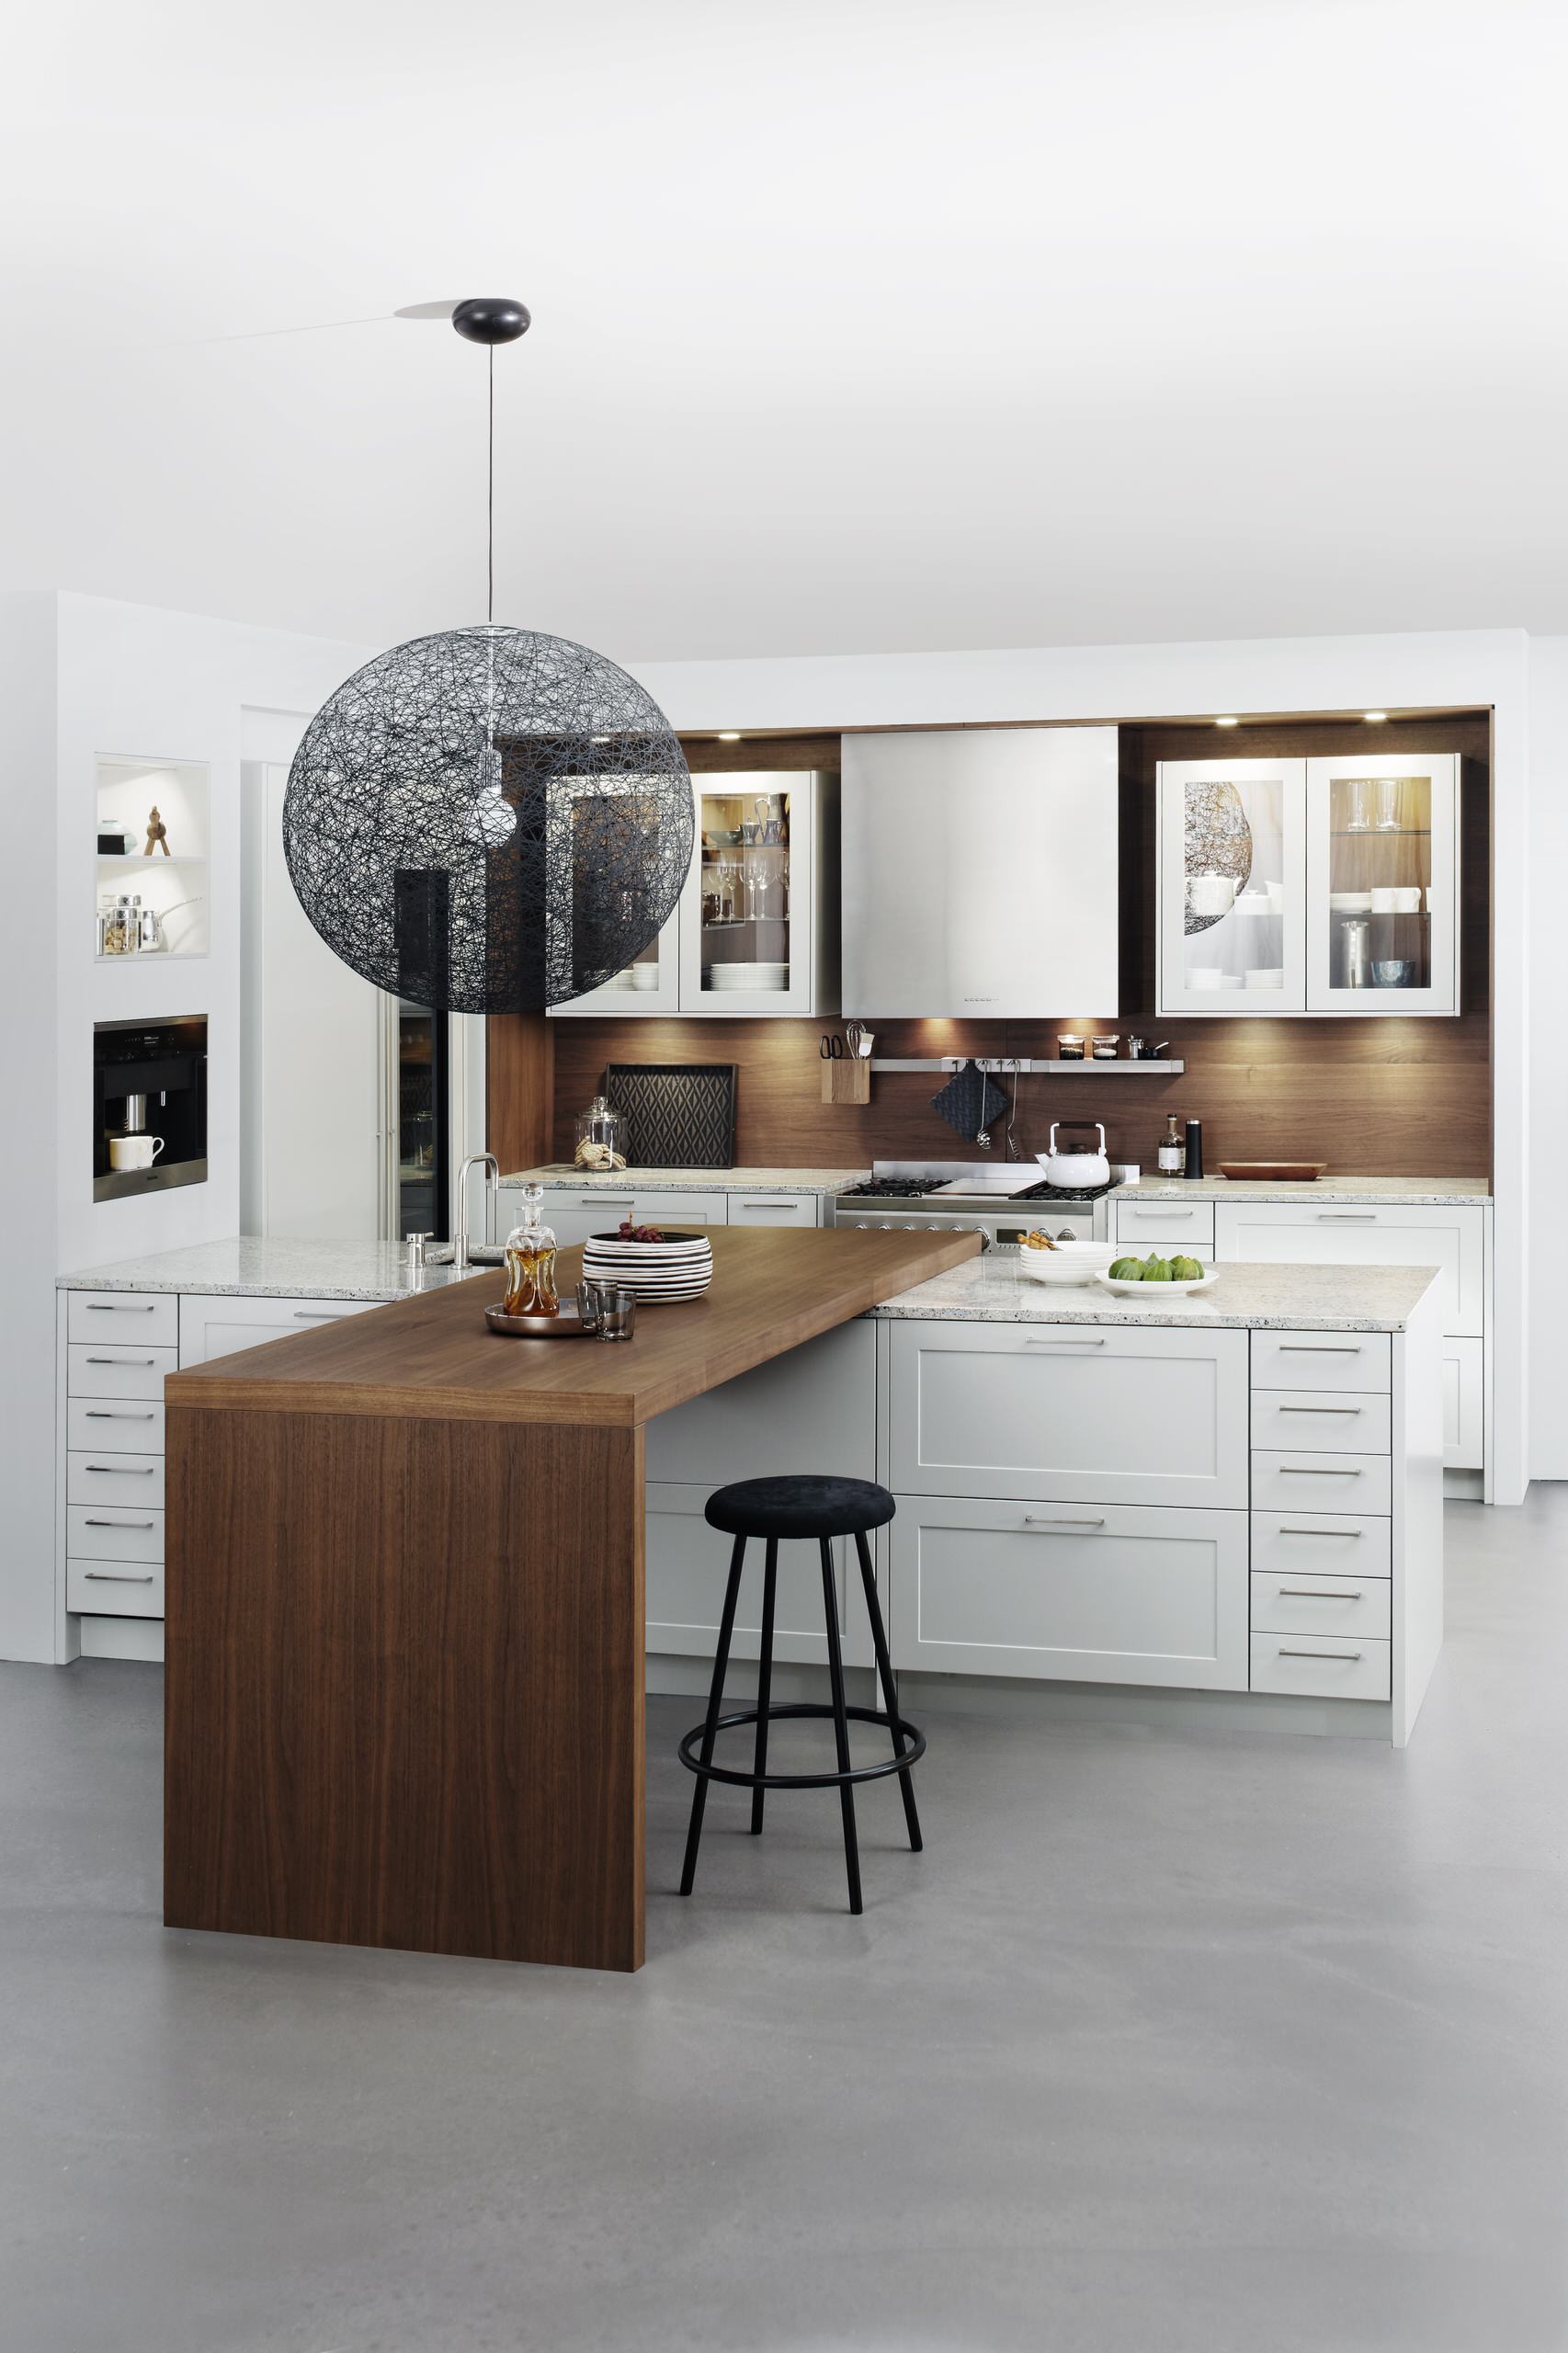 Modern Neutral Kitchen with High Gloss Cabinetry - Luxe Interiors + Design